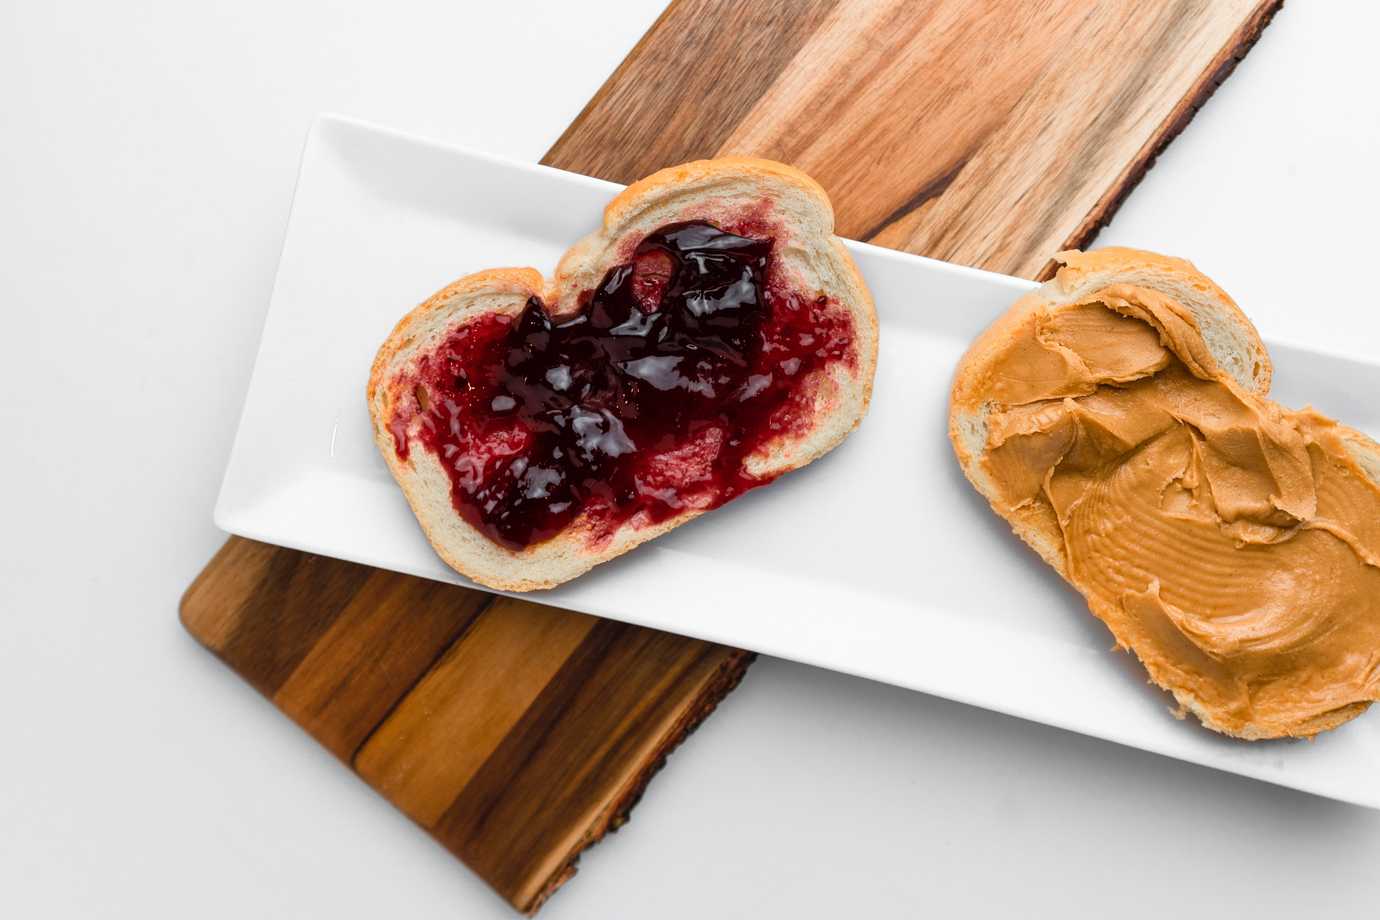 The two halves of a peanut butter and jelly sandwich